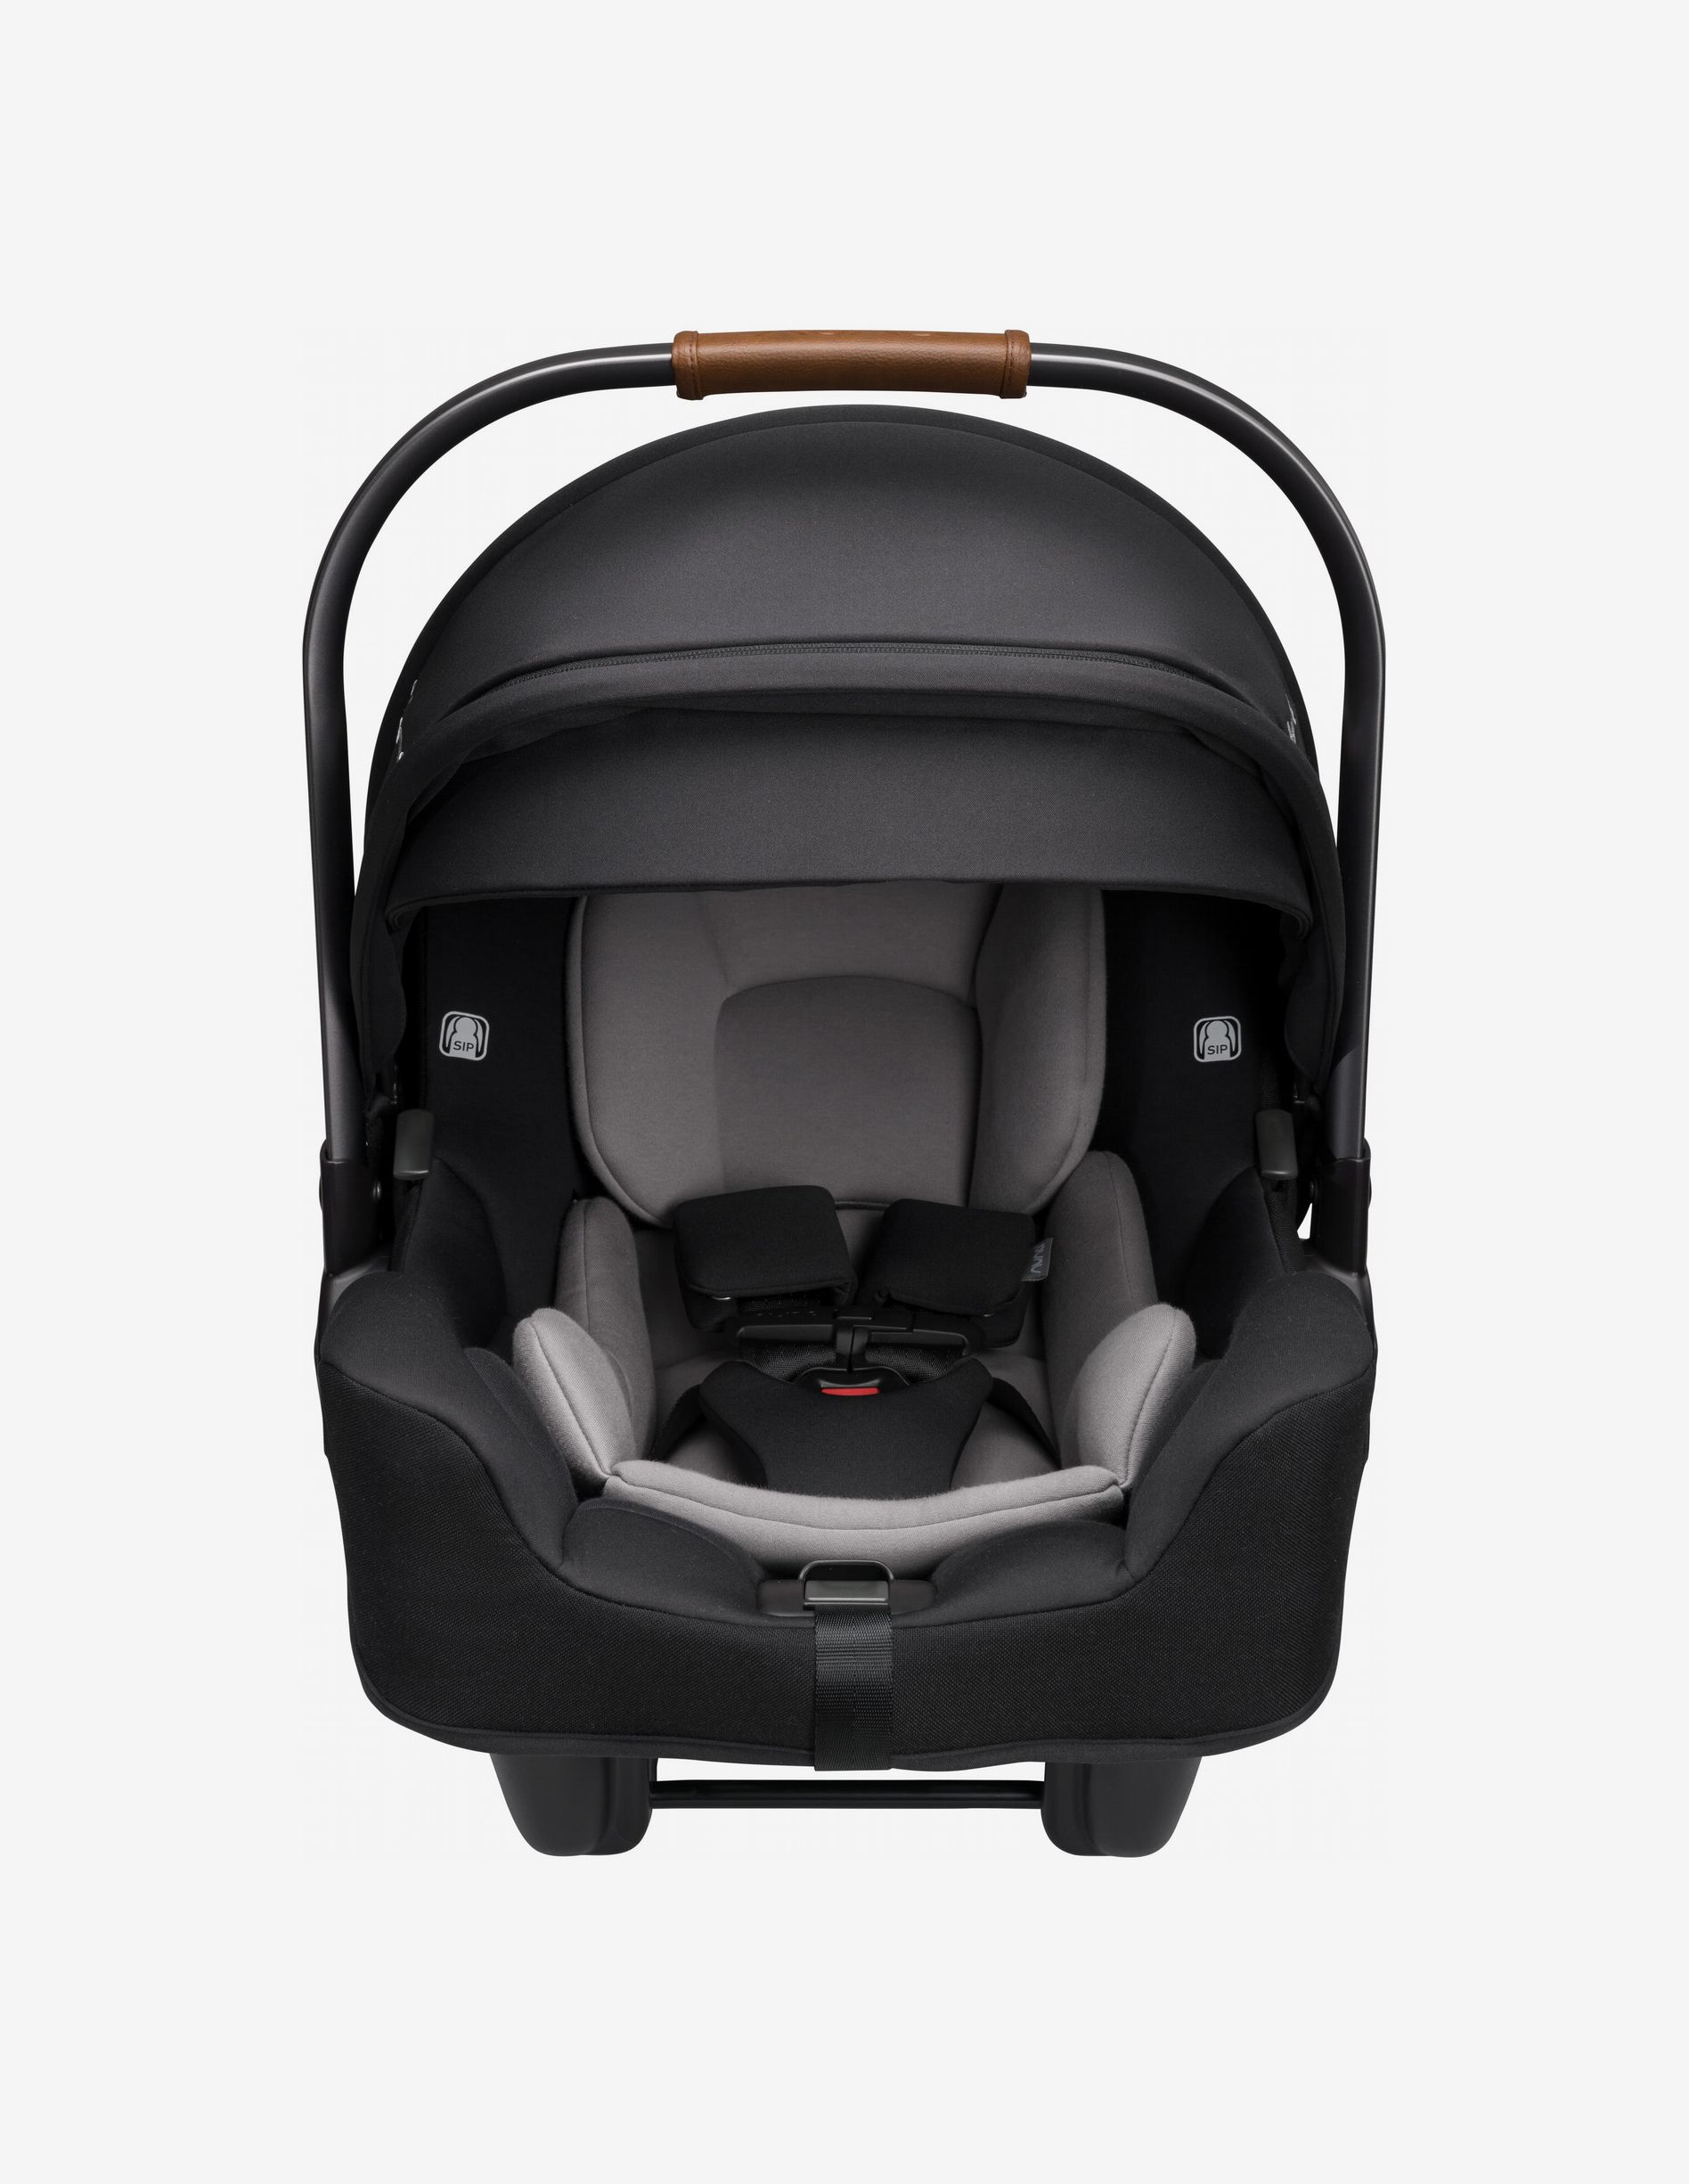 25 Best Infant Car Seats And Booster 2020 The Strategist - What Are The Best Car Seats For Infants